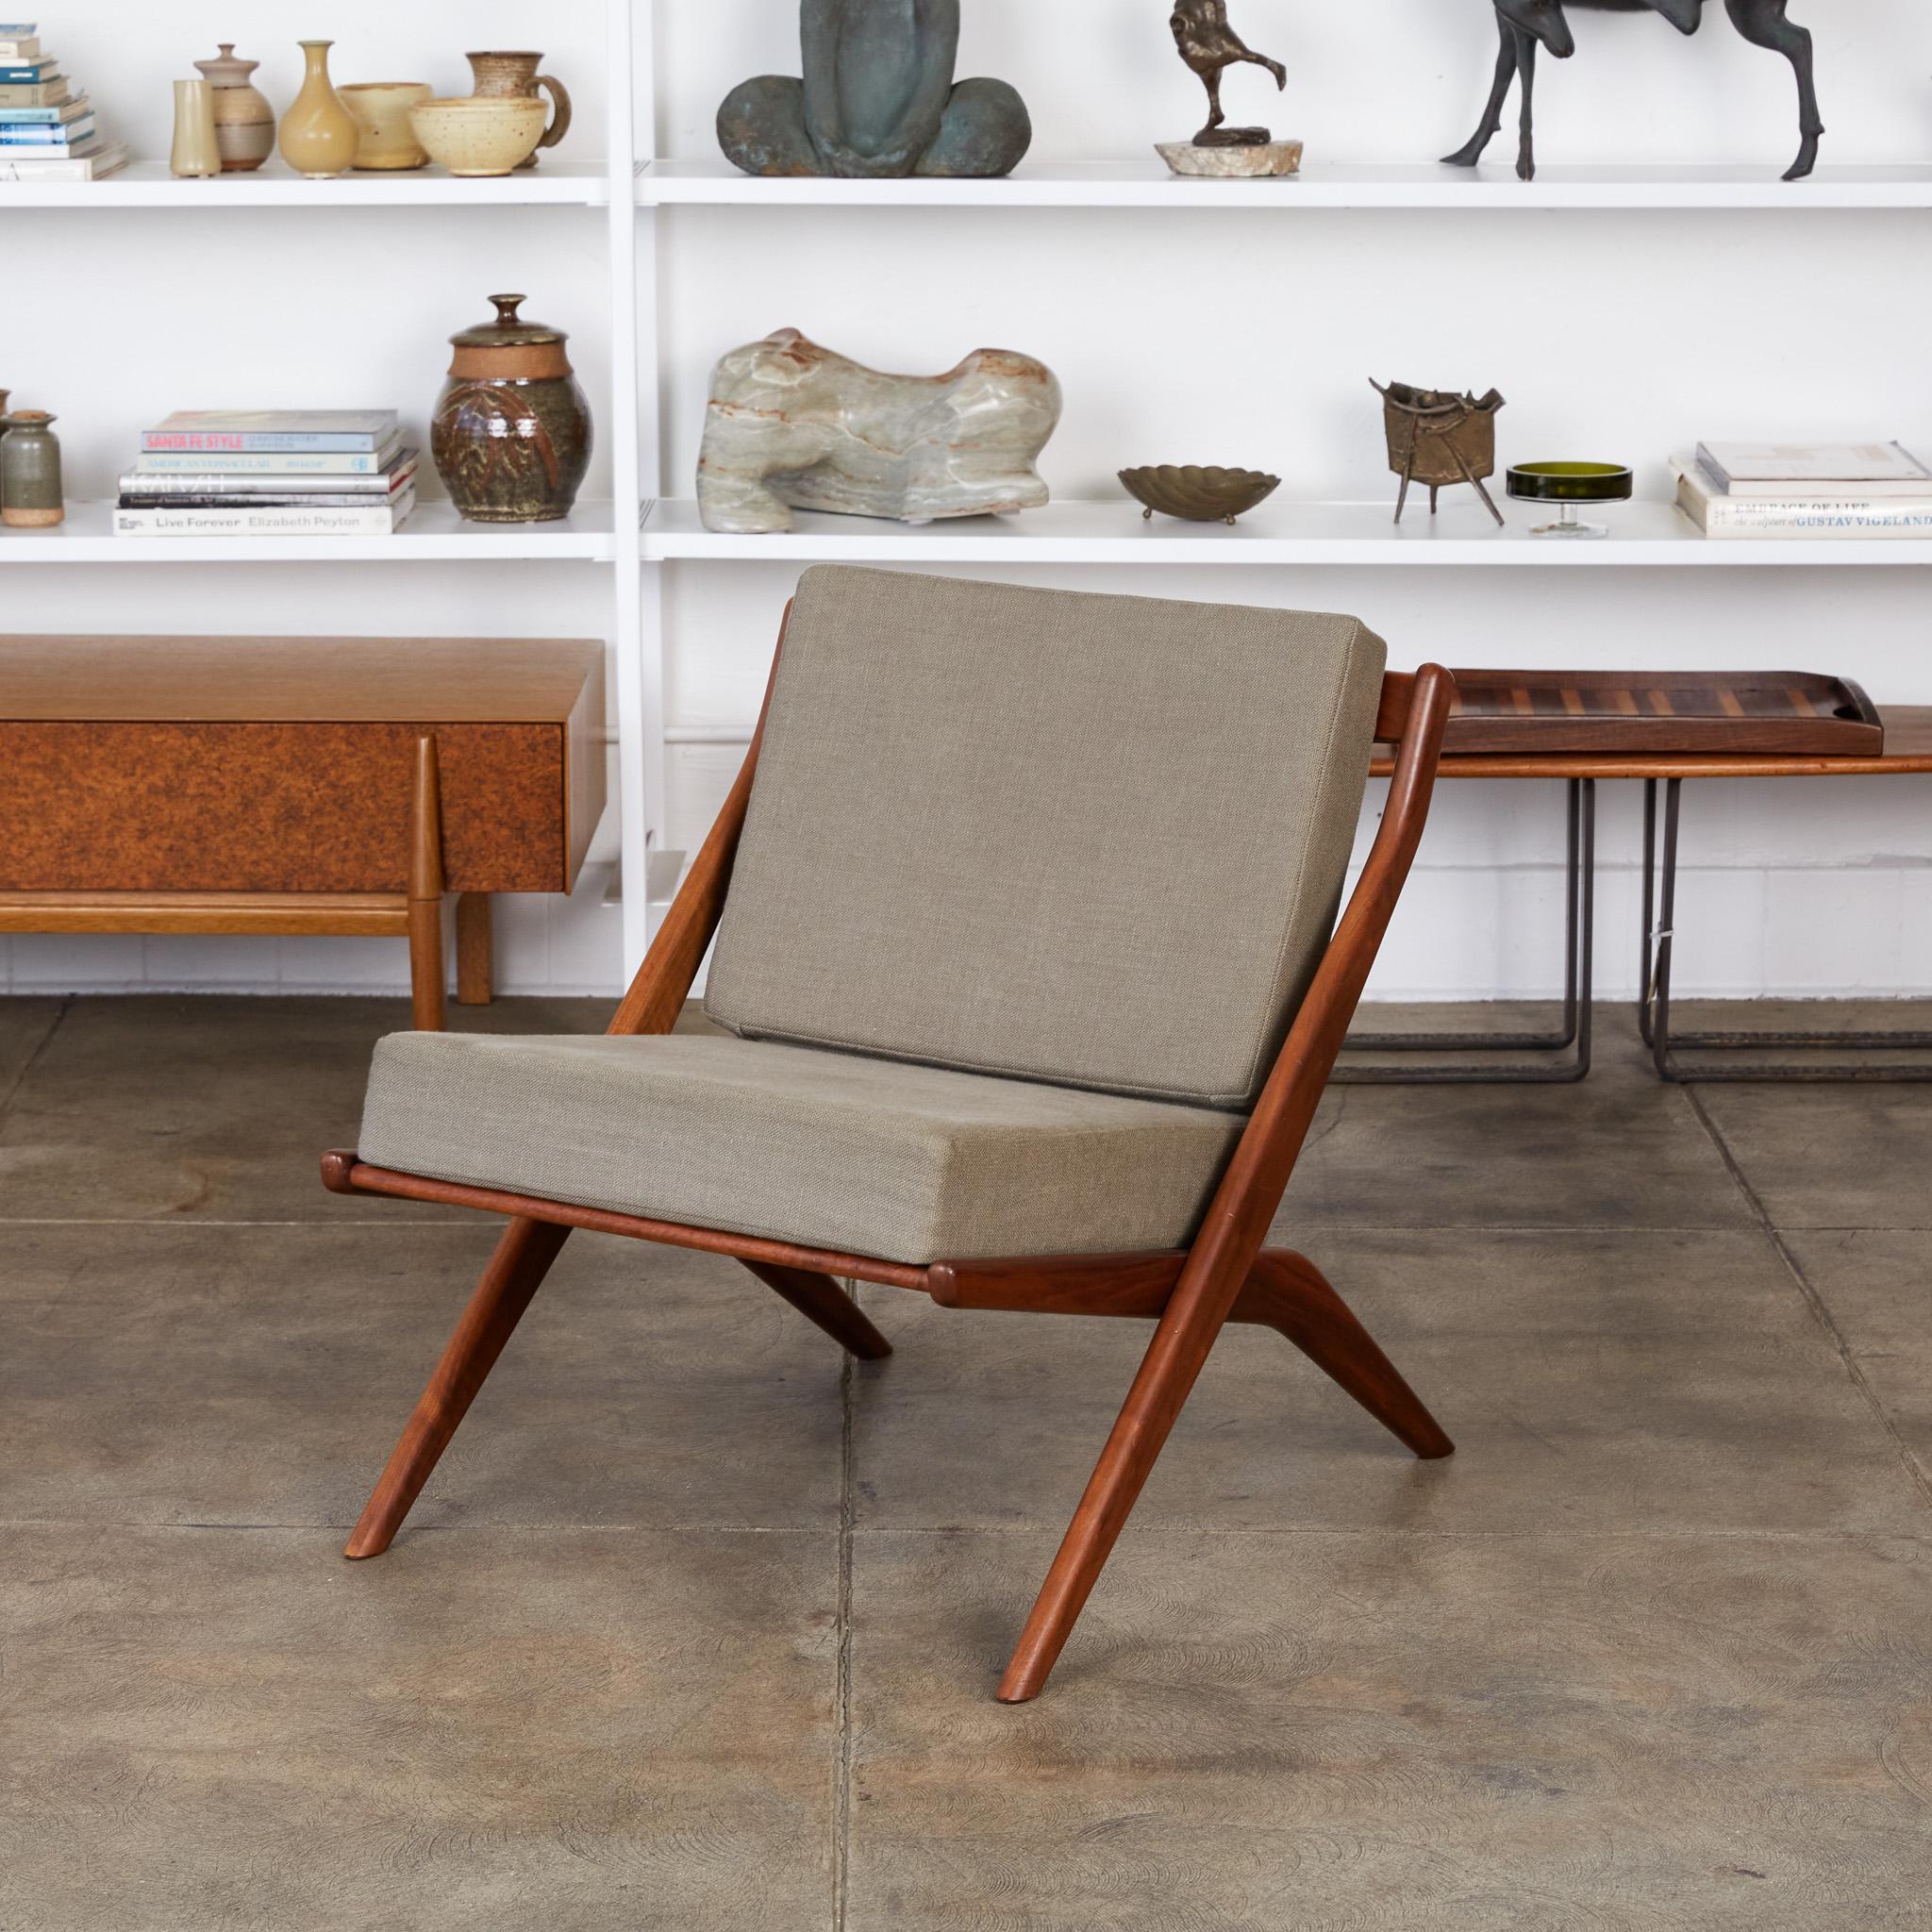 Scissor lounge chair by Folke Ohlsson for DUX, Sweden, circa 1950s. The chair features a scissor-like teak frame with slatted wood backrest and newly upholstered cushions in gray Belgian linen.

Condition: Excellent restored condition with new foam